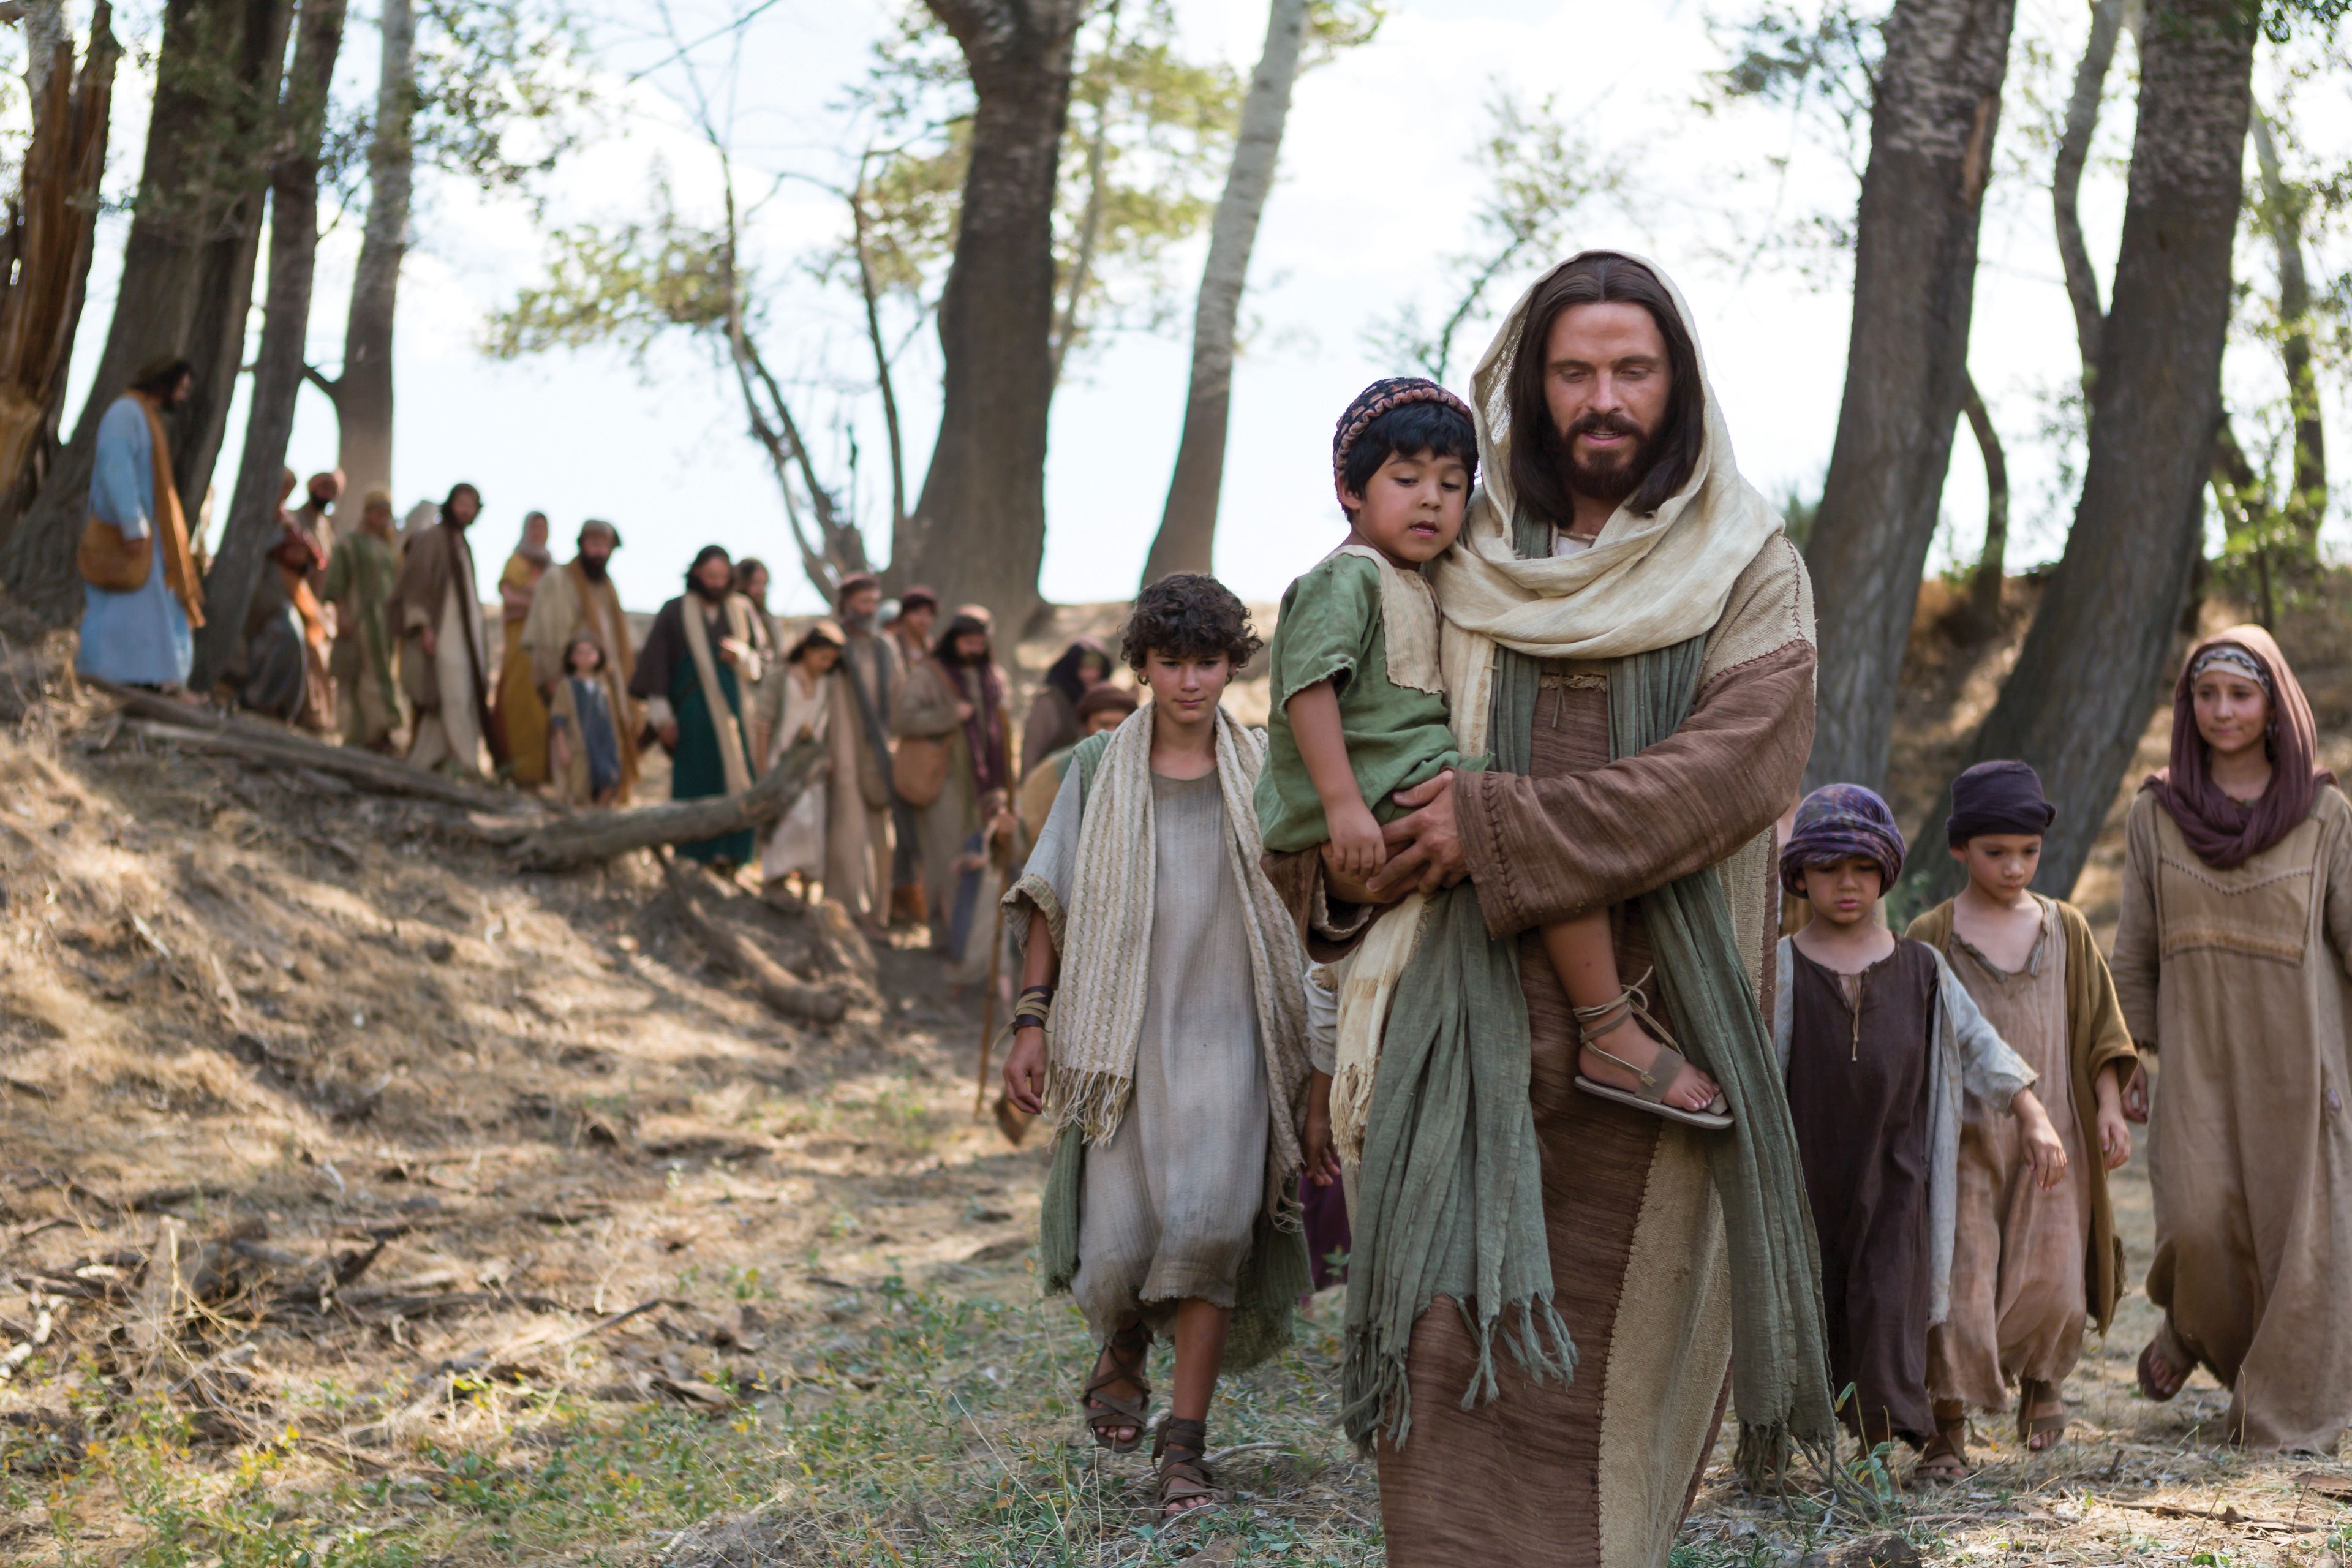 Christ leading a group of children and their parents after telling His Apostles, “Suffer little children to come unto me.”